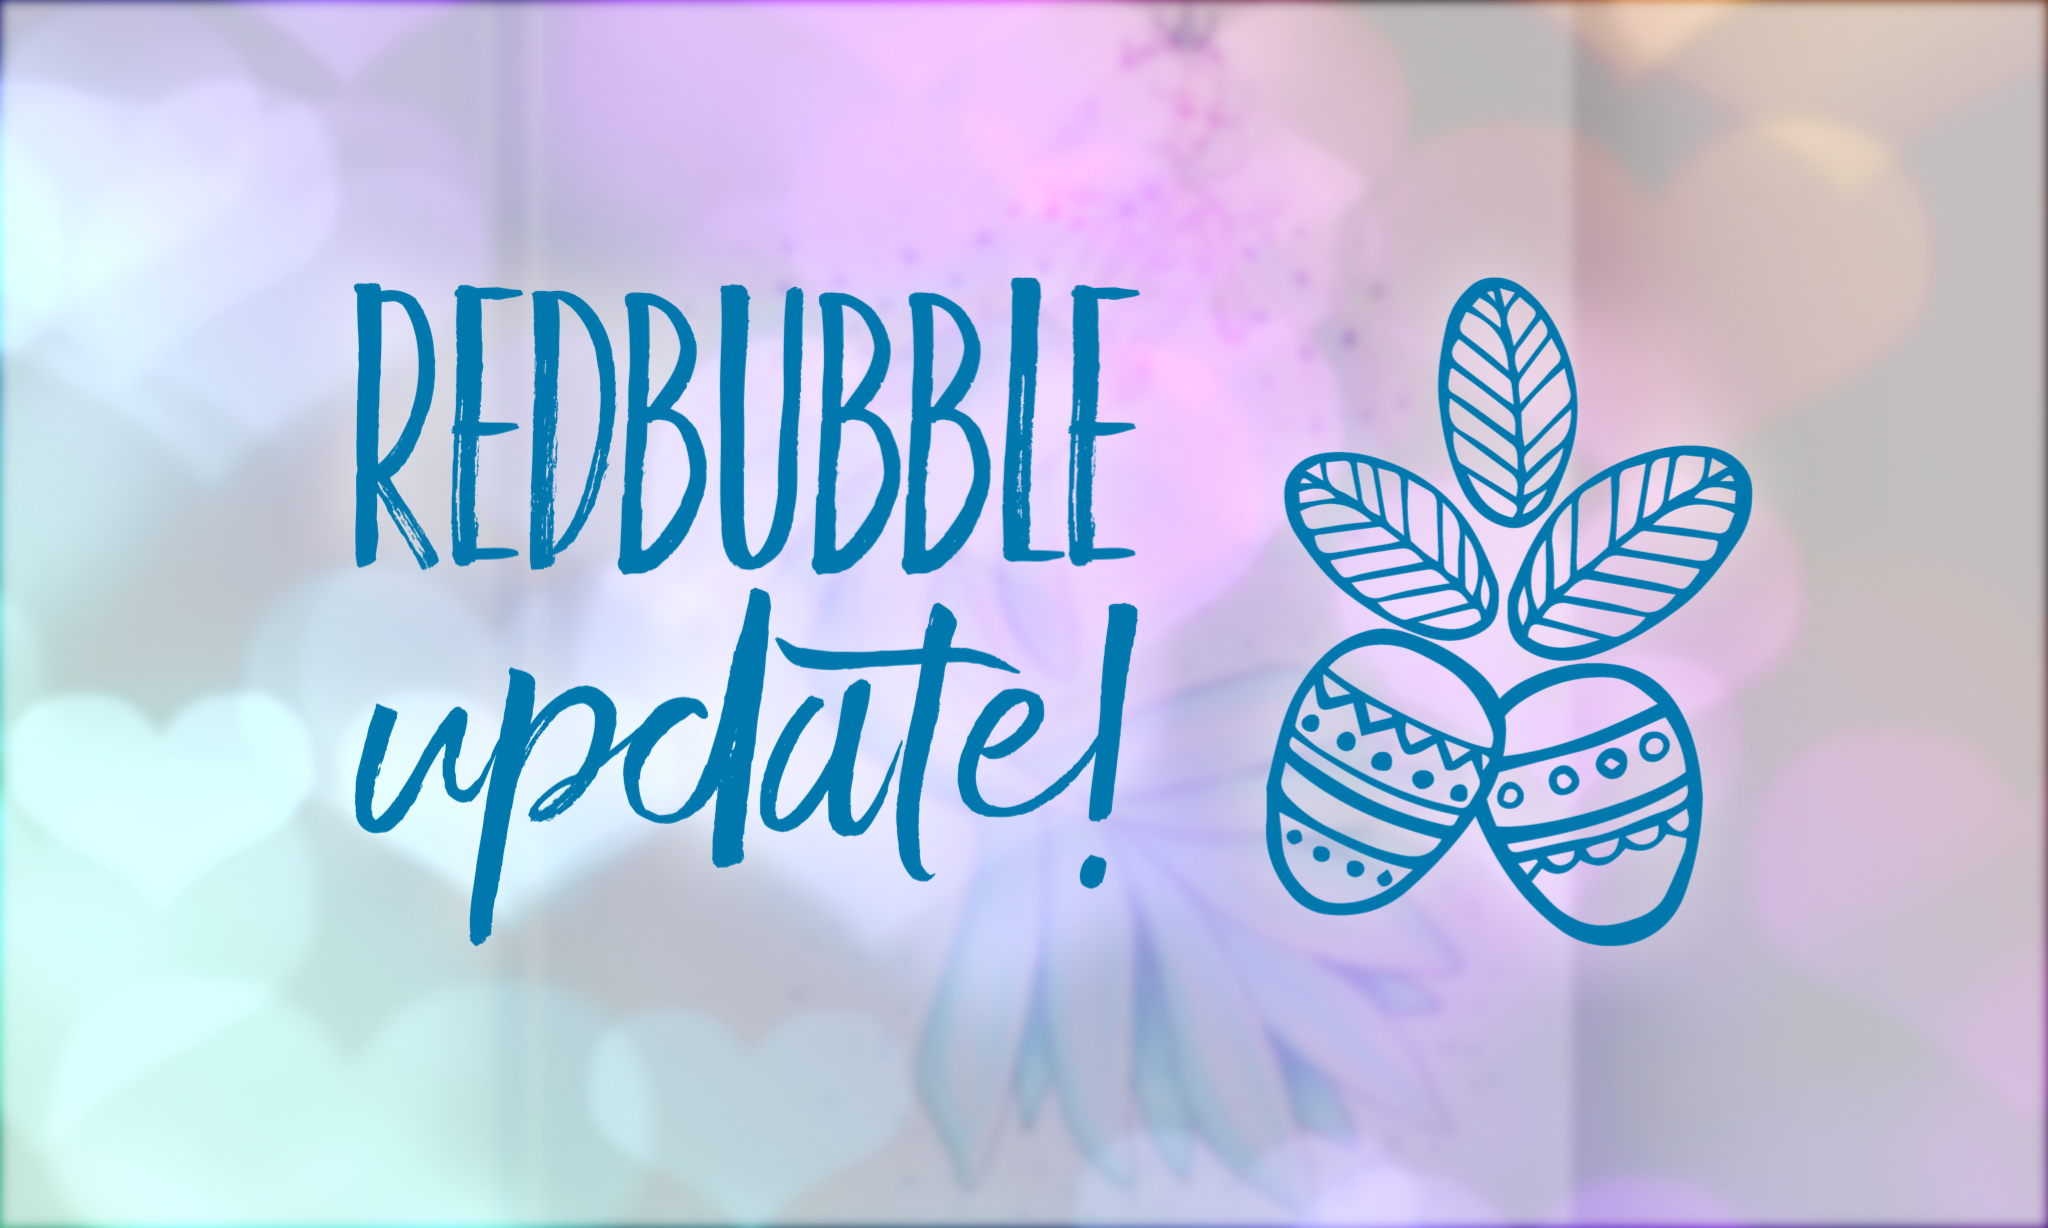 RedBubble Update!